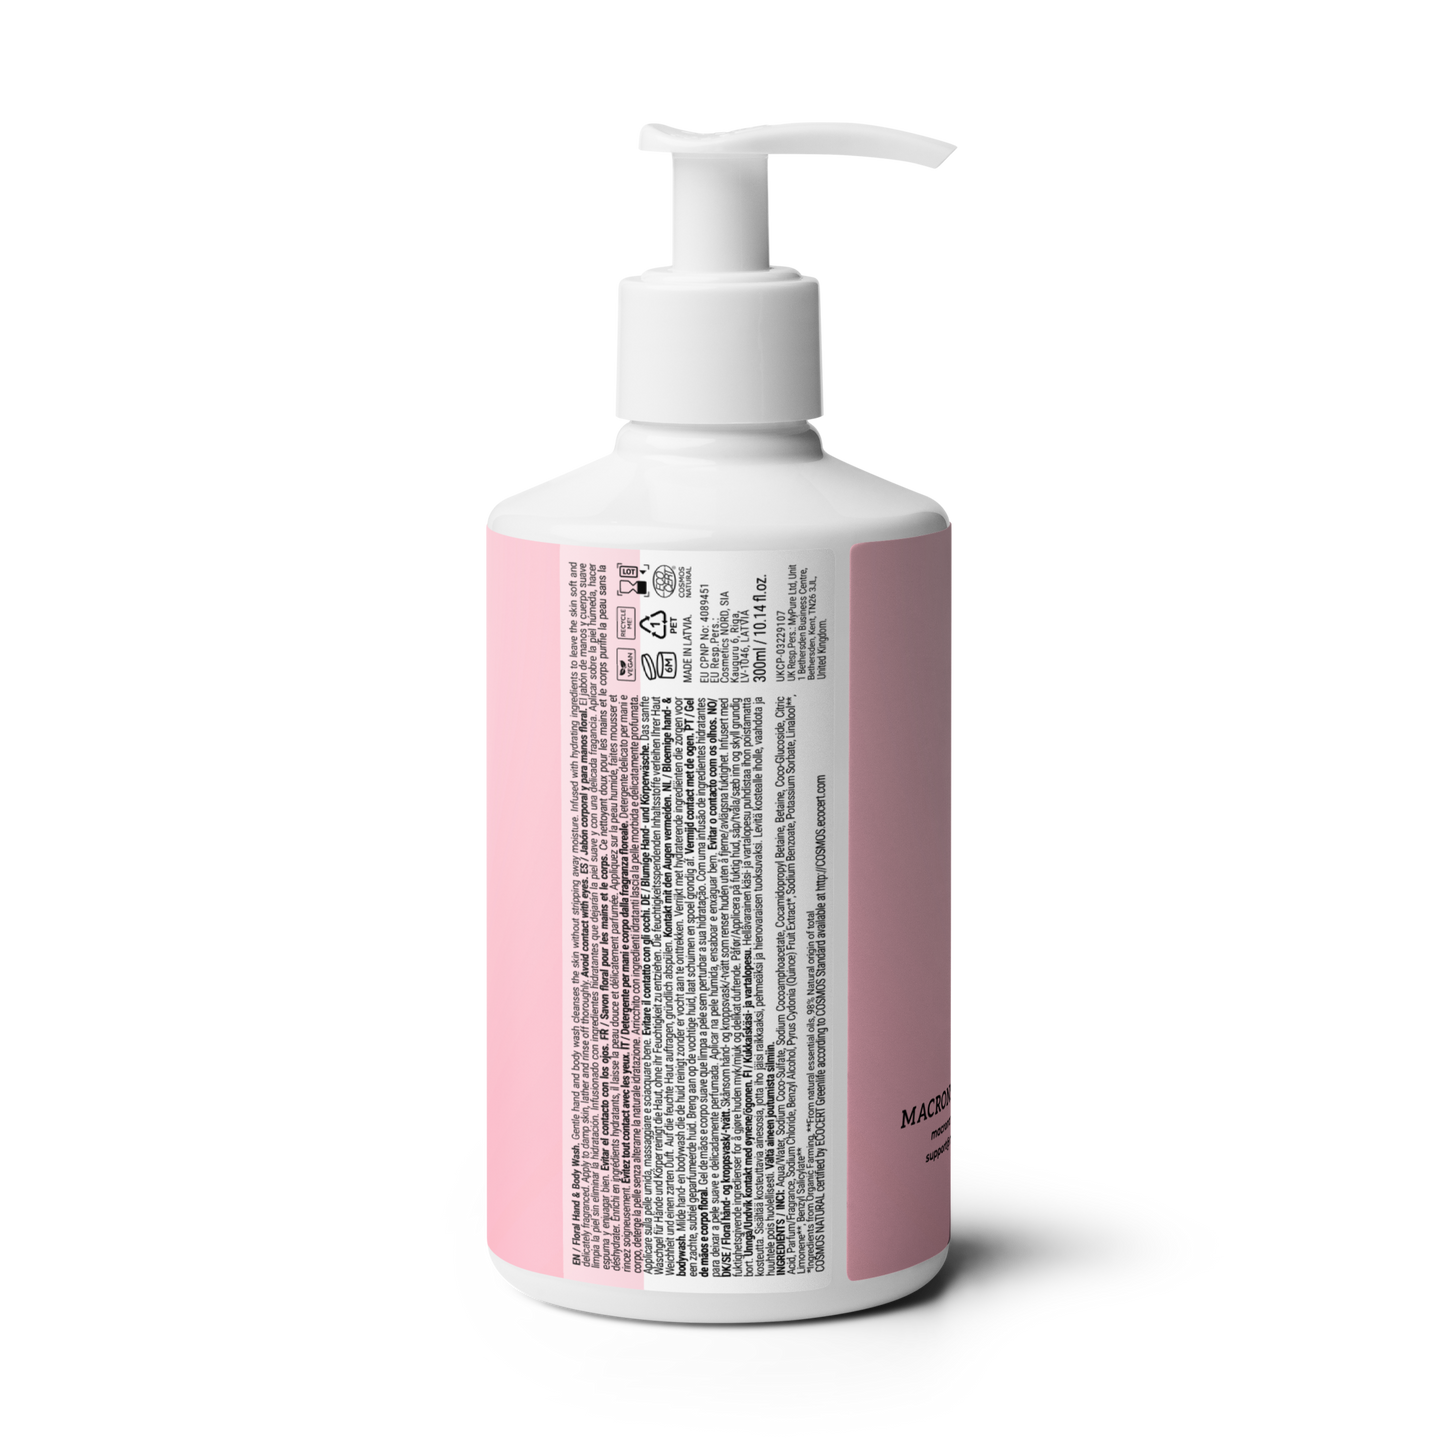 Macron's Aroma (Floral hand & body wash)